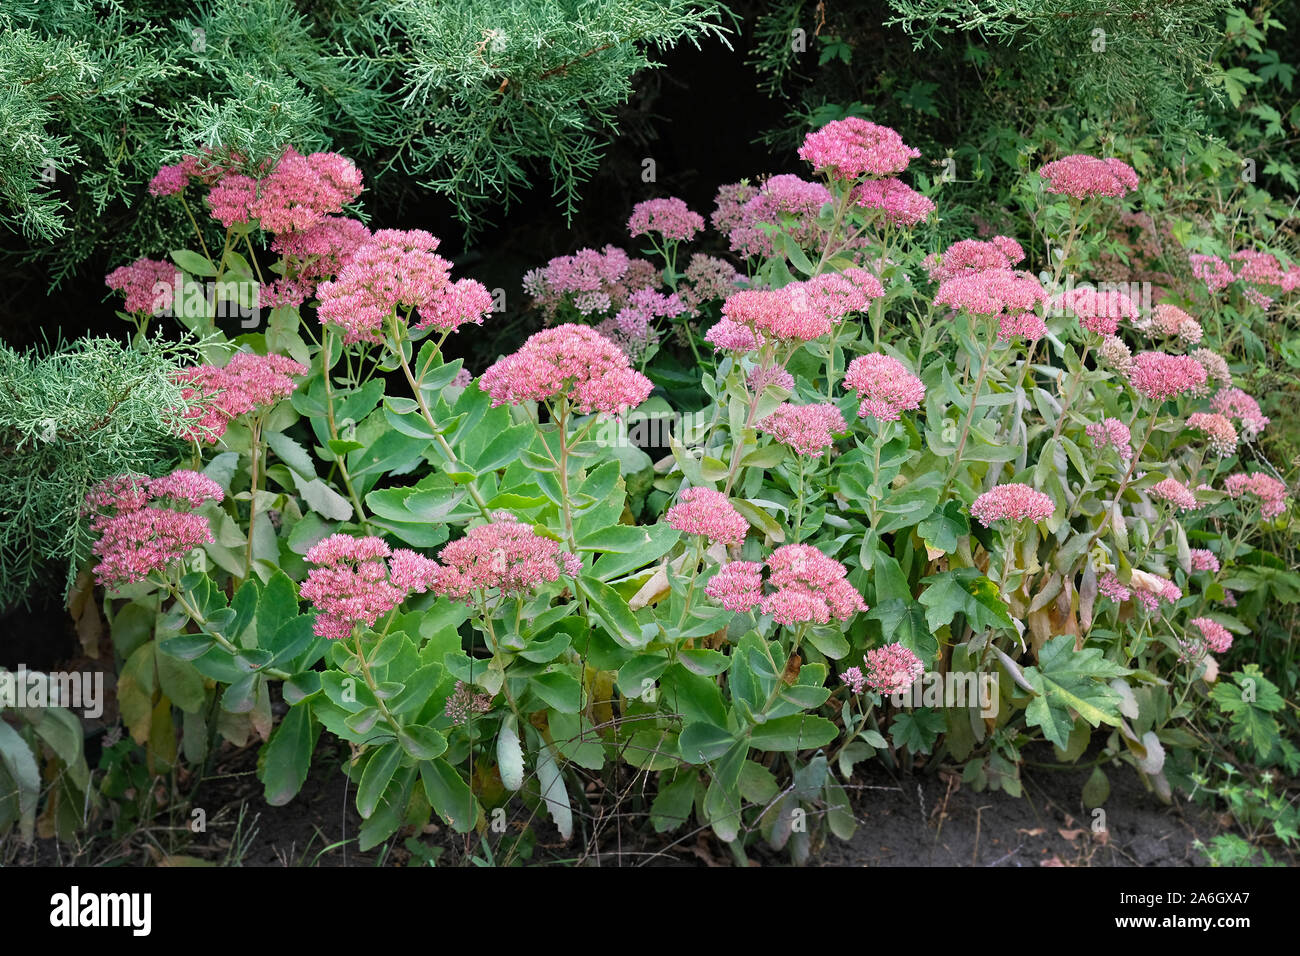 Large plant with fleshy green leaves, stems and inflorescences. Blooming pink Sedum spectabile (stonecrop prominent) in the summer season. Medicinal p Stock Photo